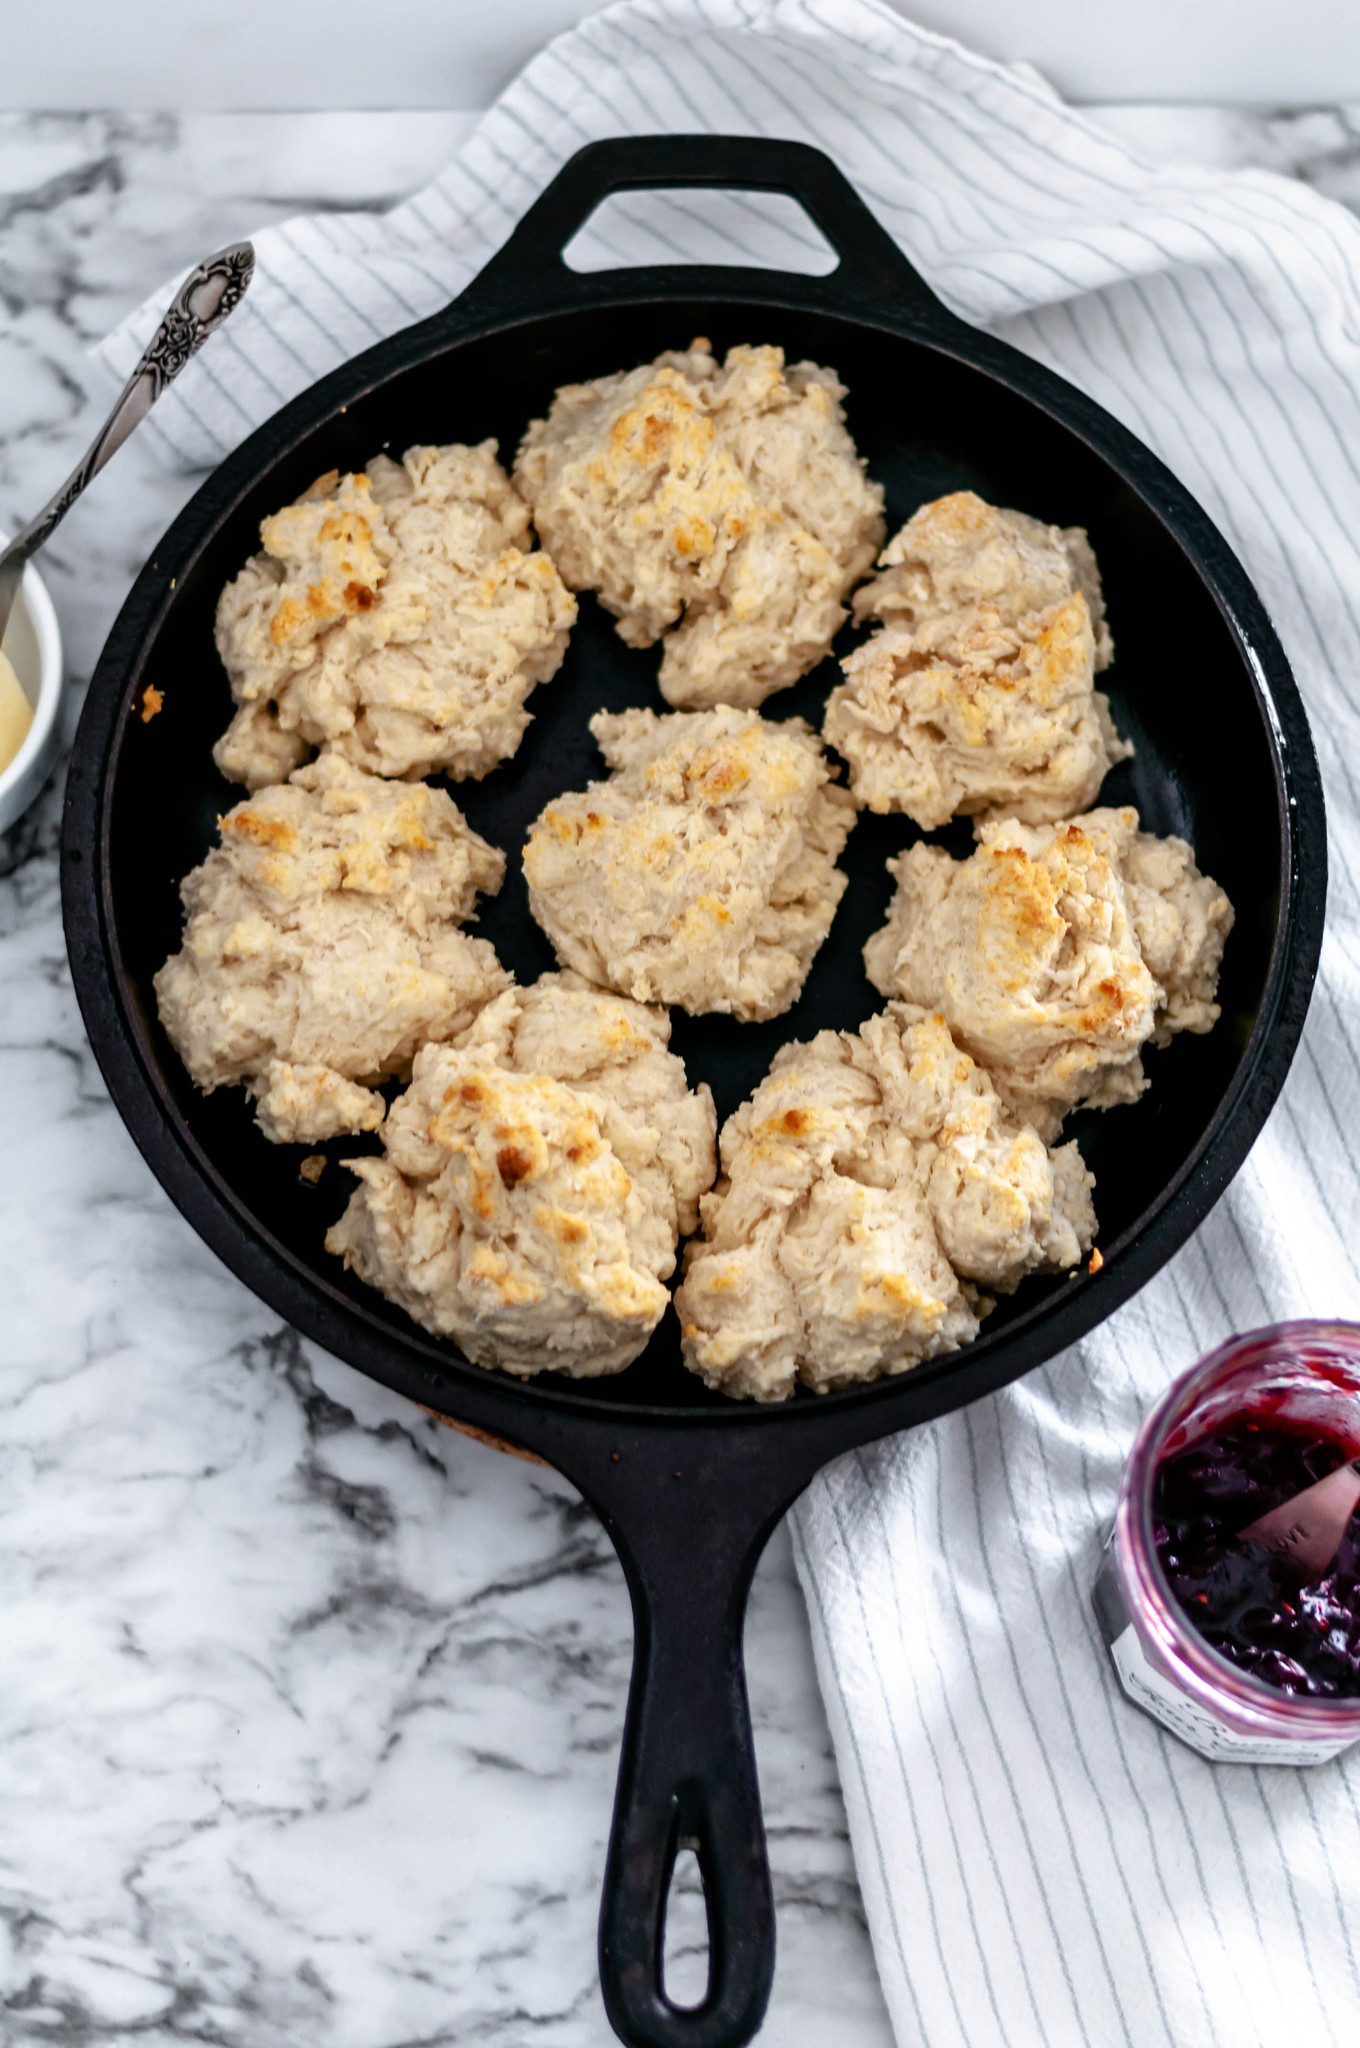 Skillet Drop Biscuits are so simple to make and can be made and baked in less than 30 minutes making them perfect for weeknight meals.